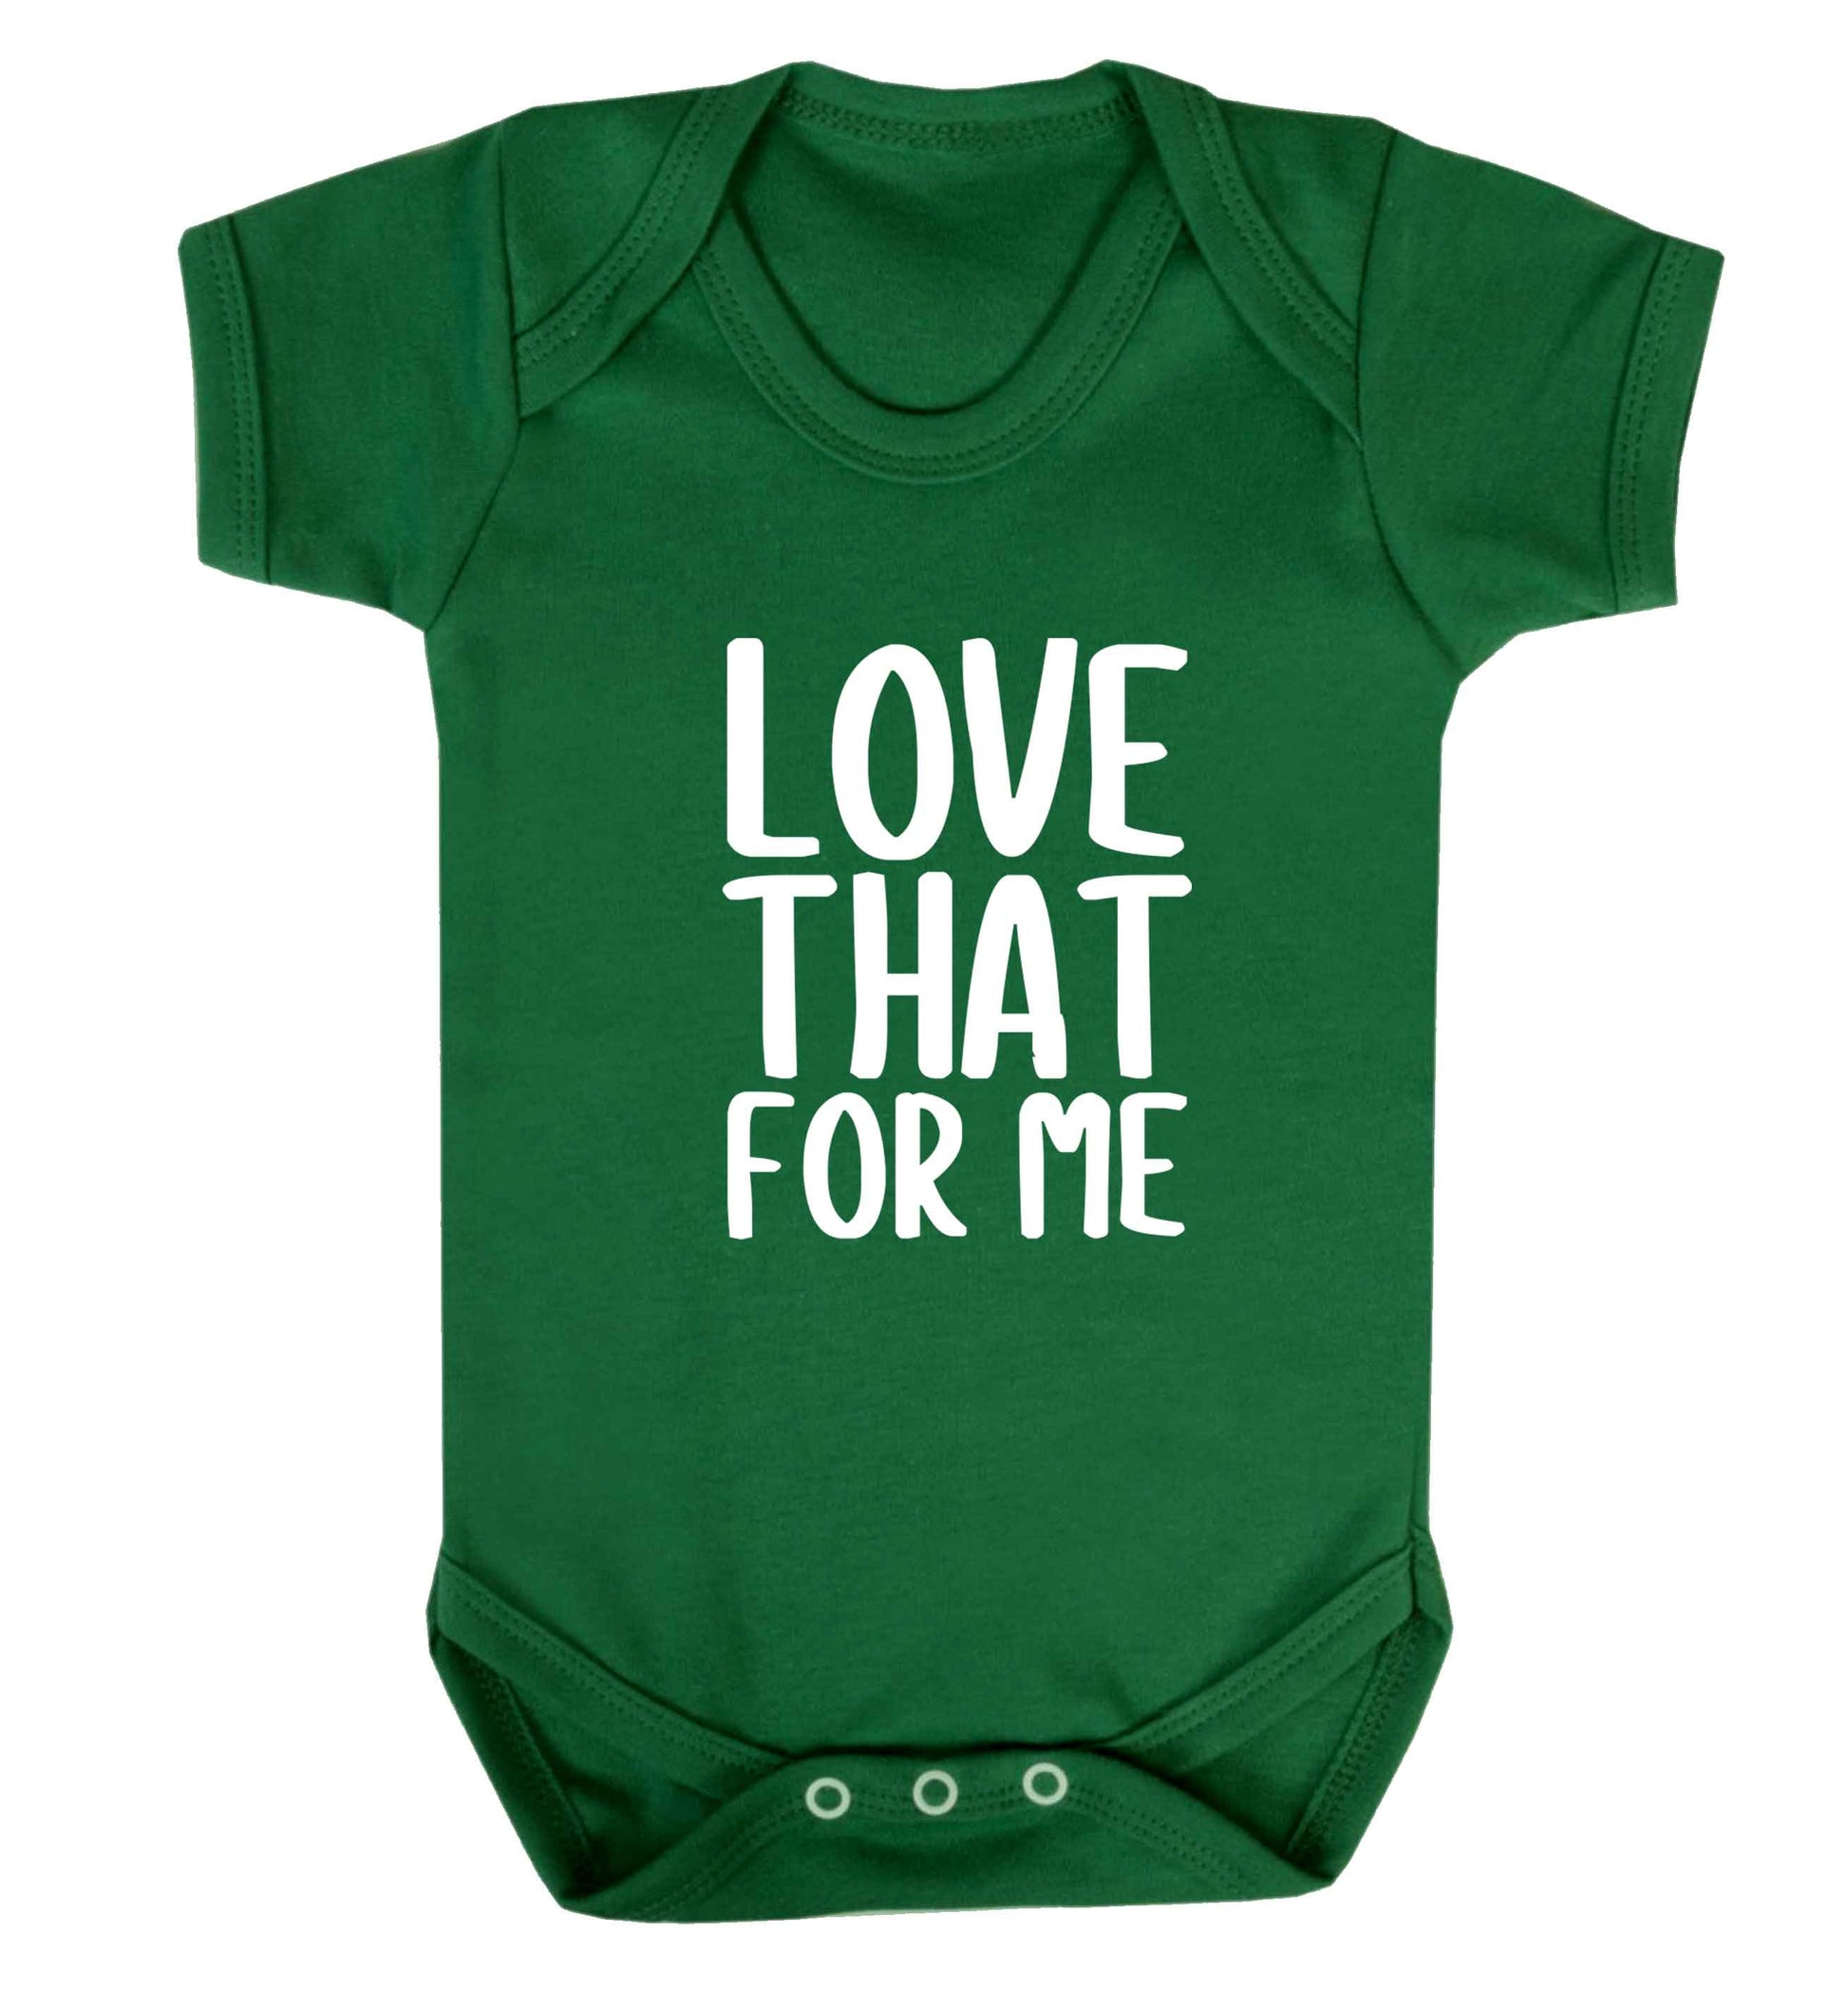 We love this for YOU! Who else loves saying this?!  baby vest green 18-24 months